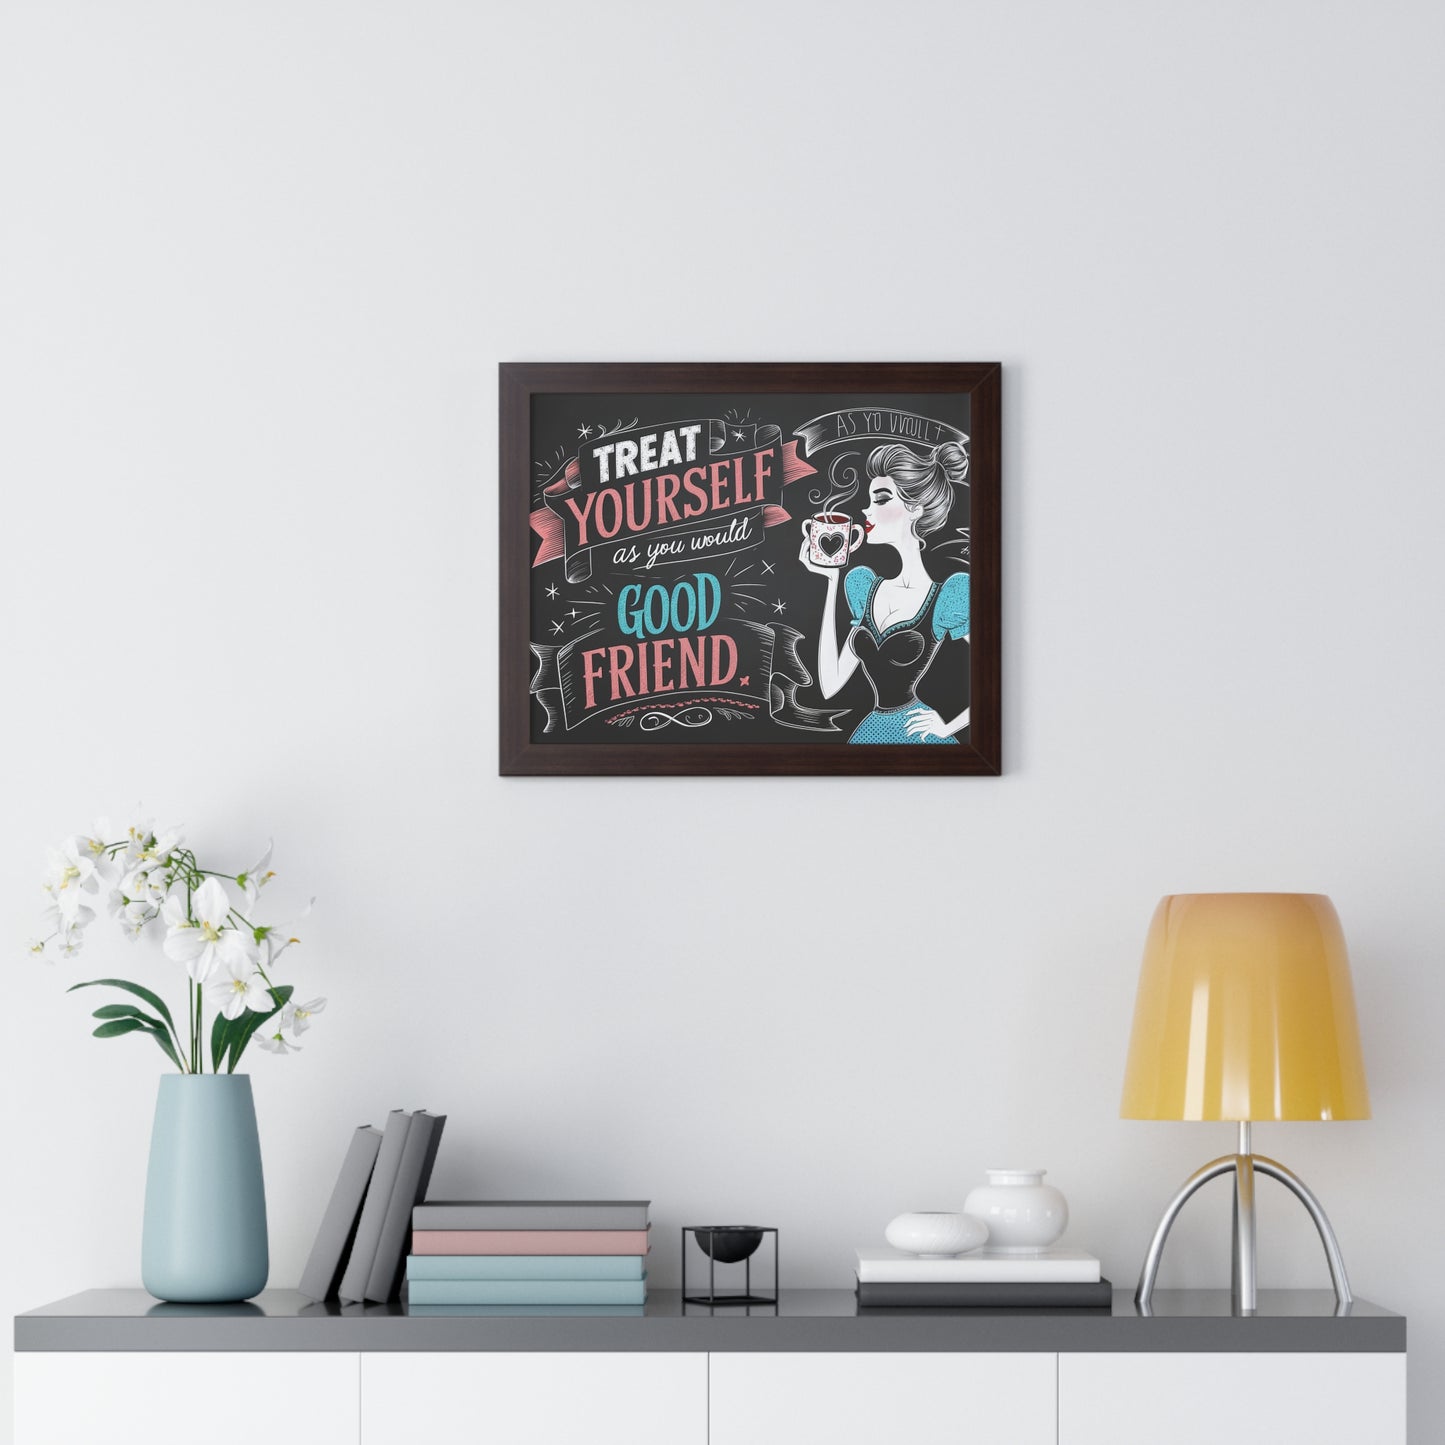 "Treat Yourself as You Would a Good Friend" Framed Poster | Coffee Time Classics - Coffee Time Classics